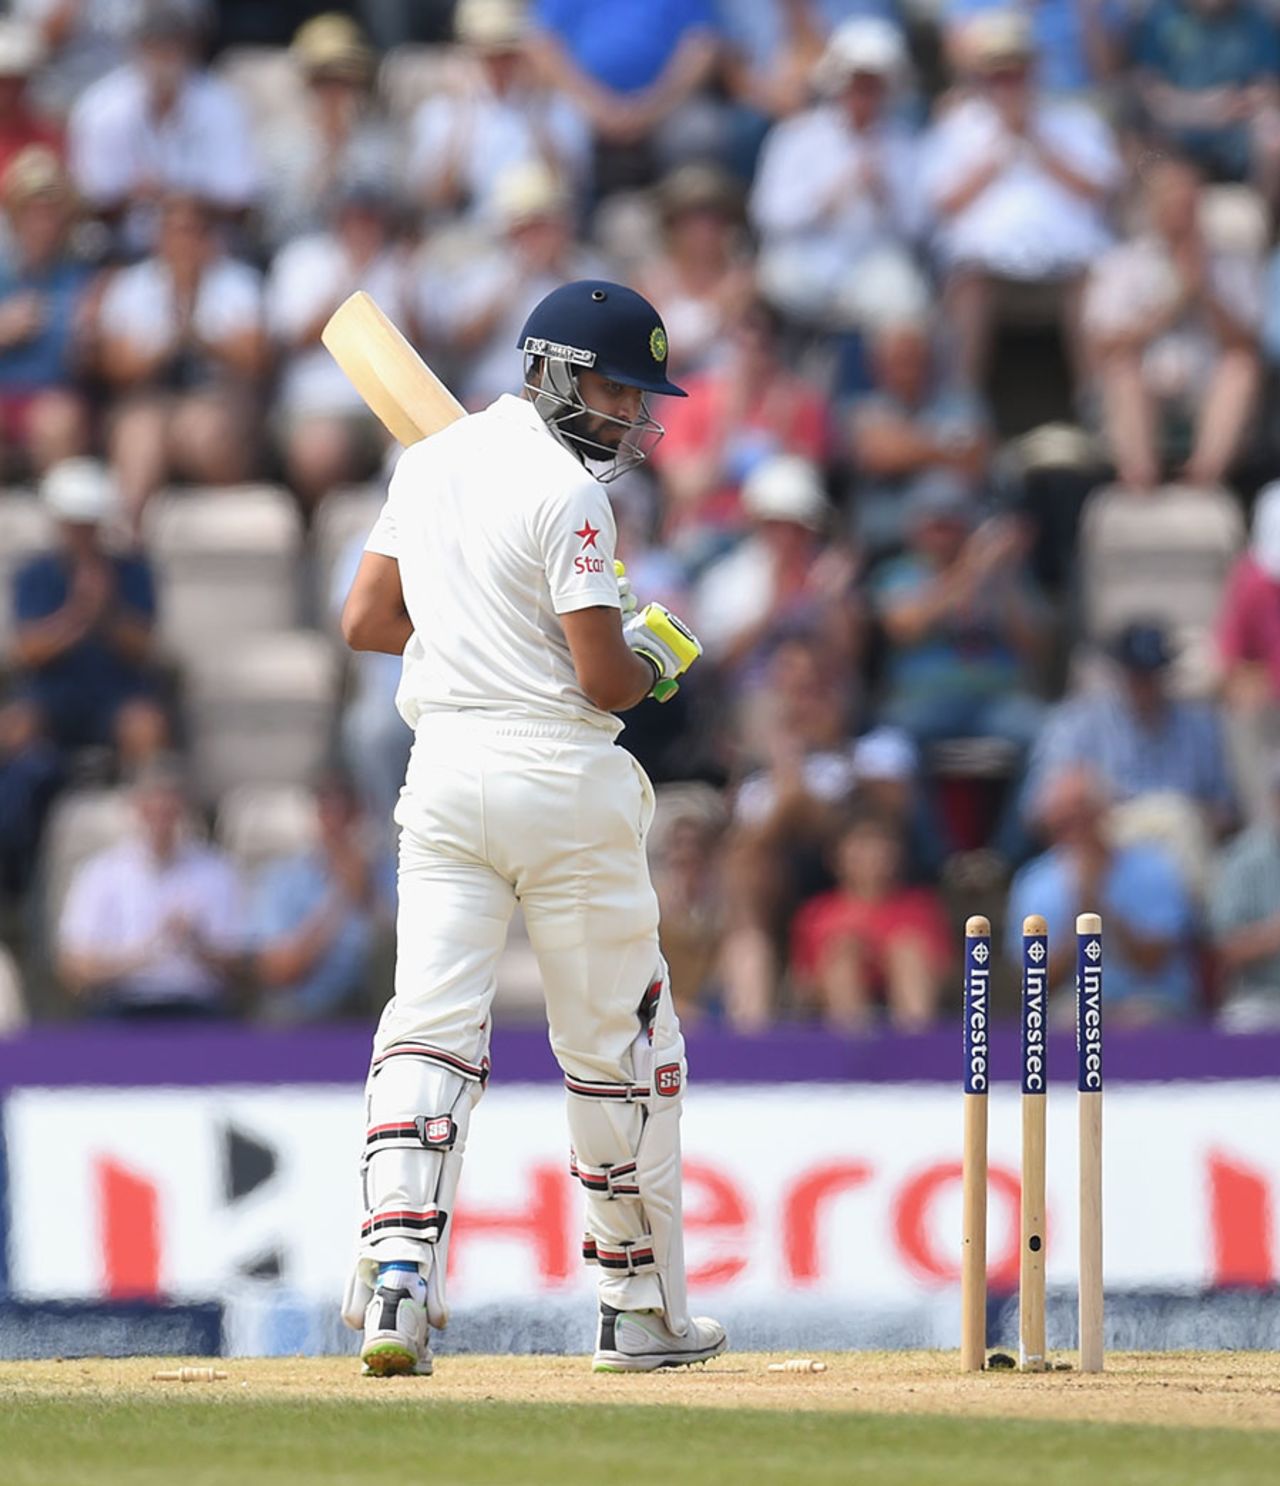 Ravi Jadeja couldn't believed how he had been bowled, England v India, 3rd Investec Test, Ageas Bowl, 5th day, July 31, 2014